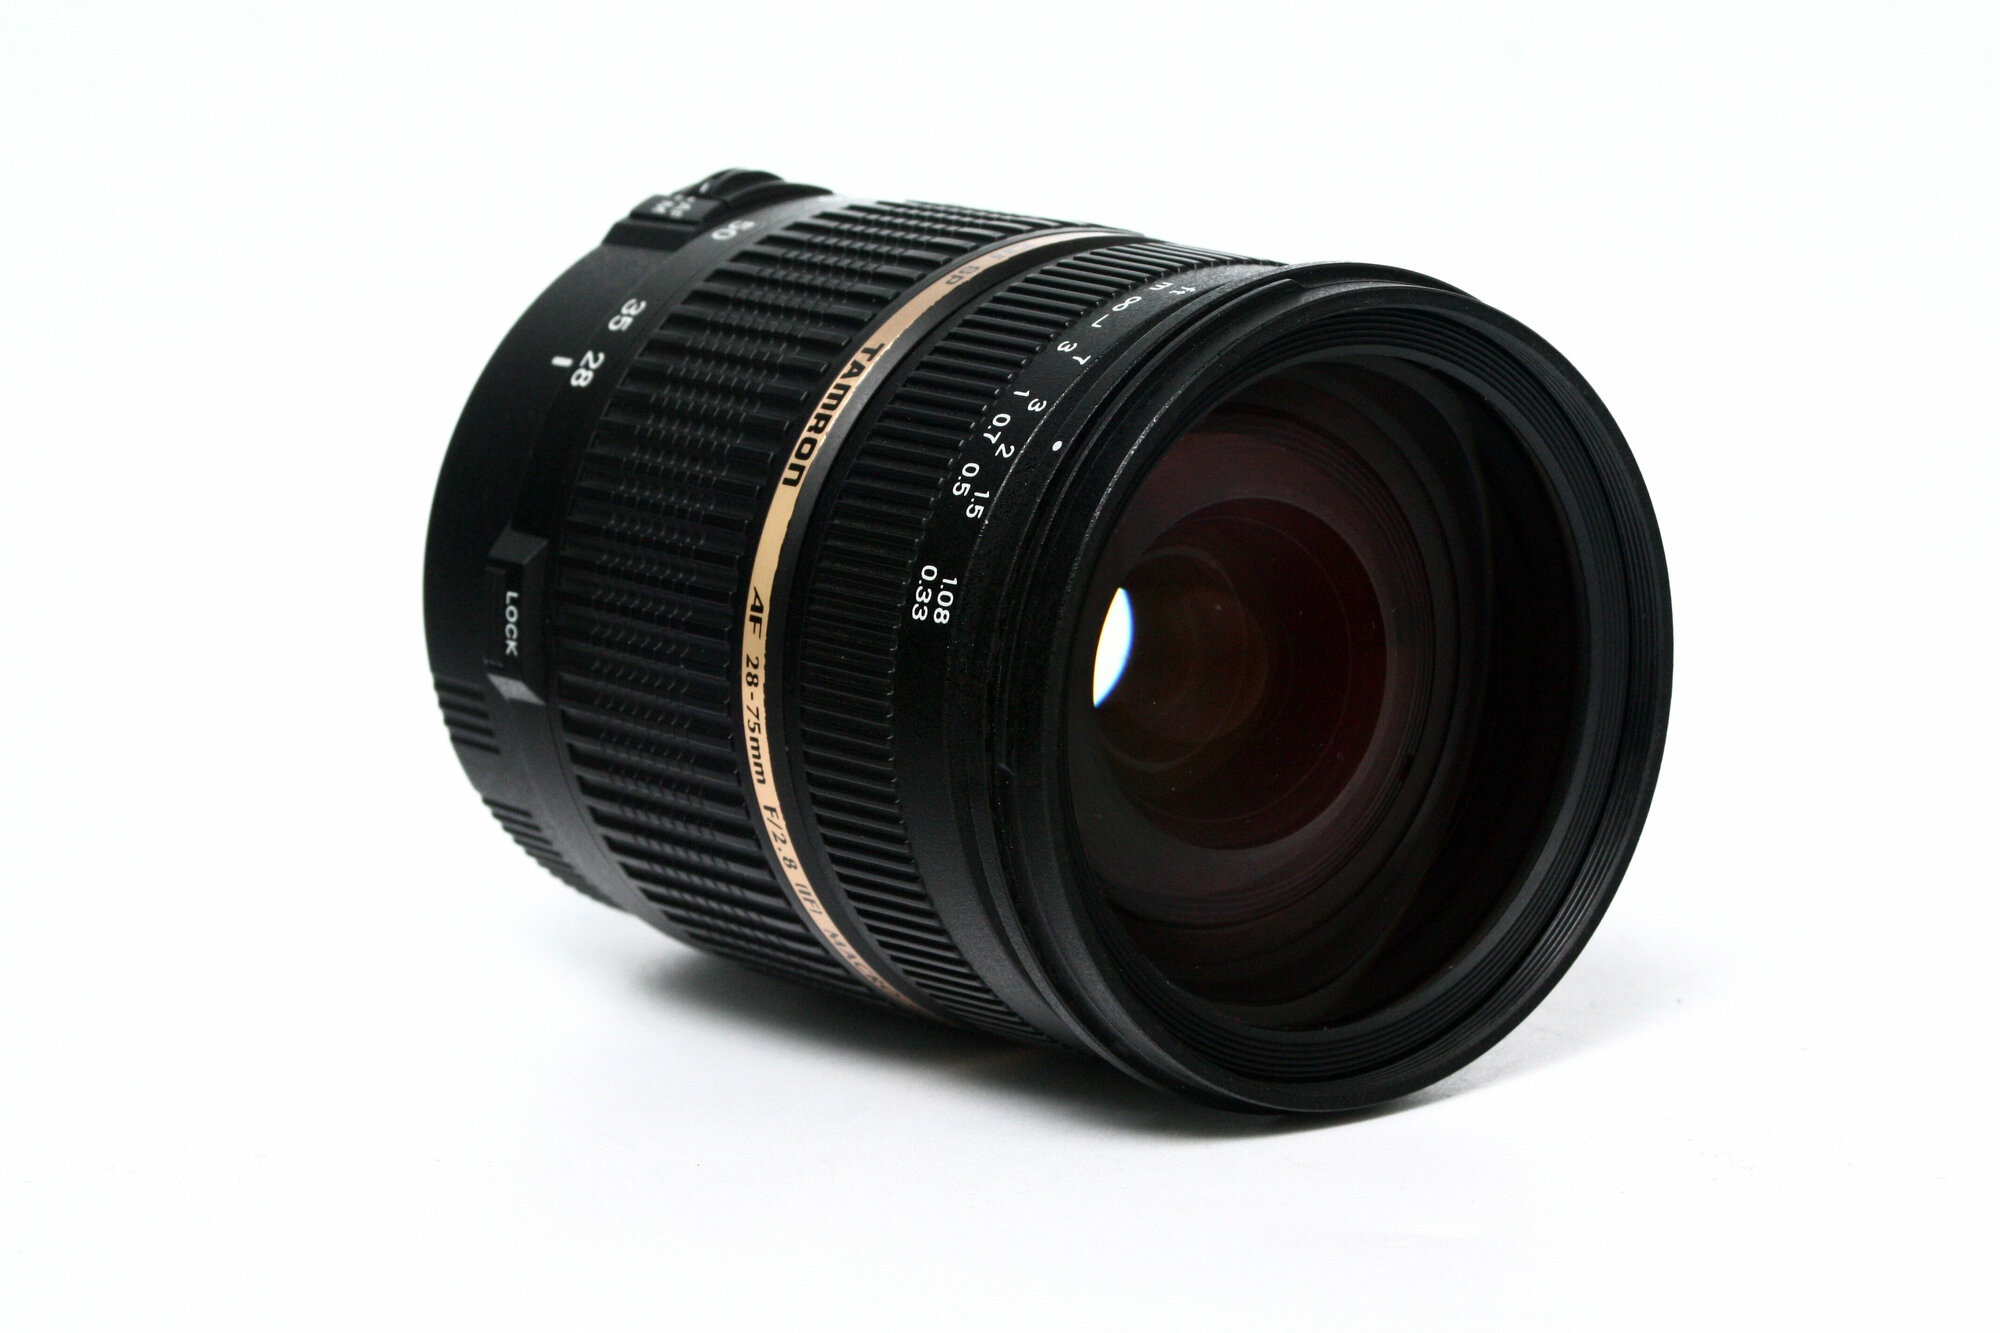 Tamron SP AF 28-75mm f2.8 XR Di LD Aspherical (IF) Canon EF